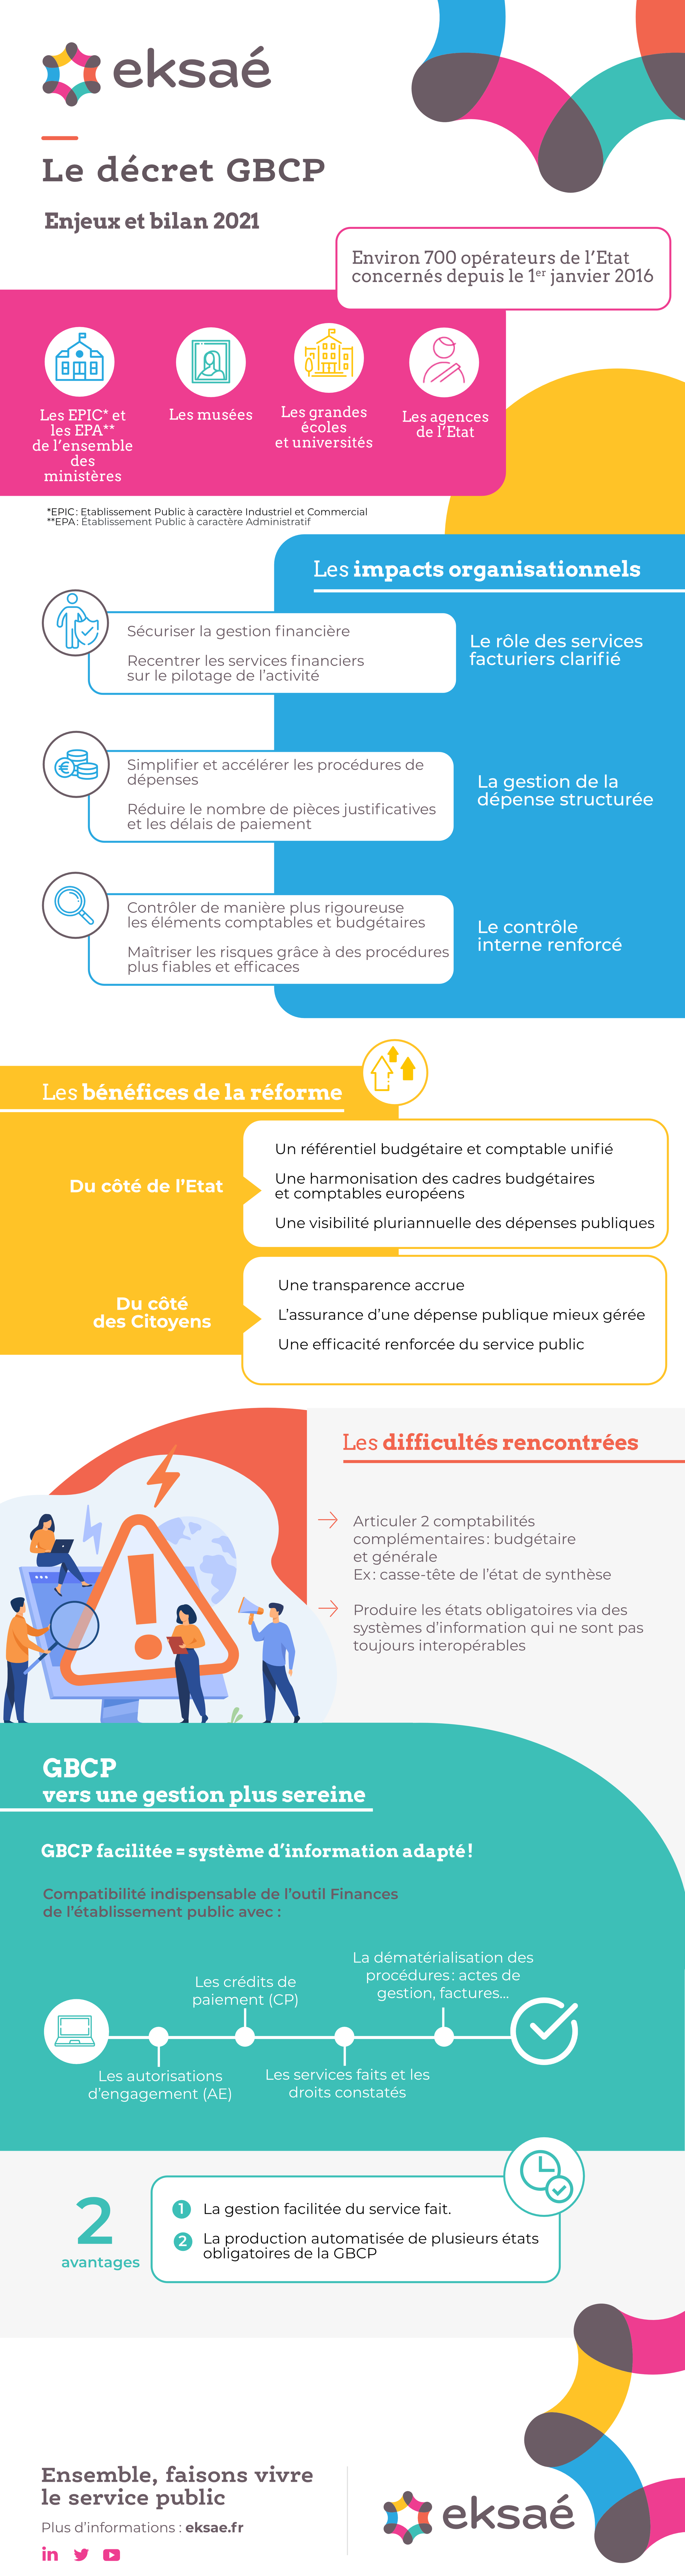 Infographie GBCP